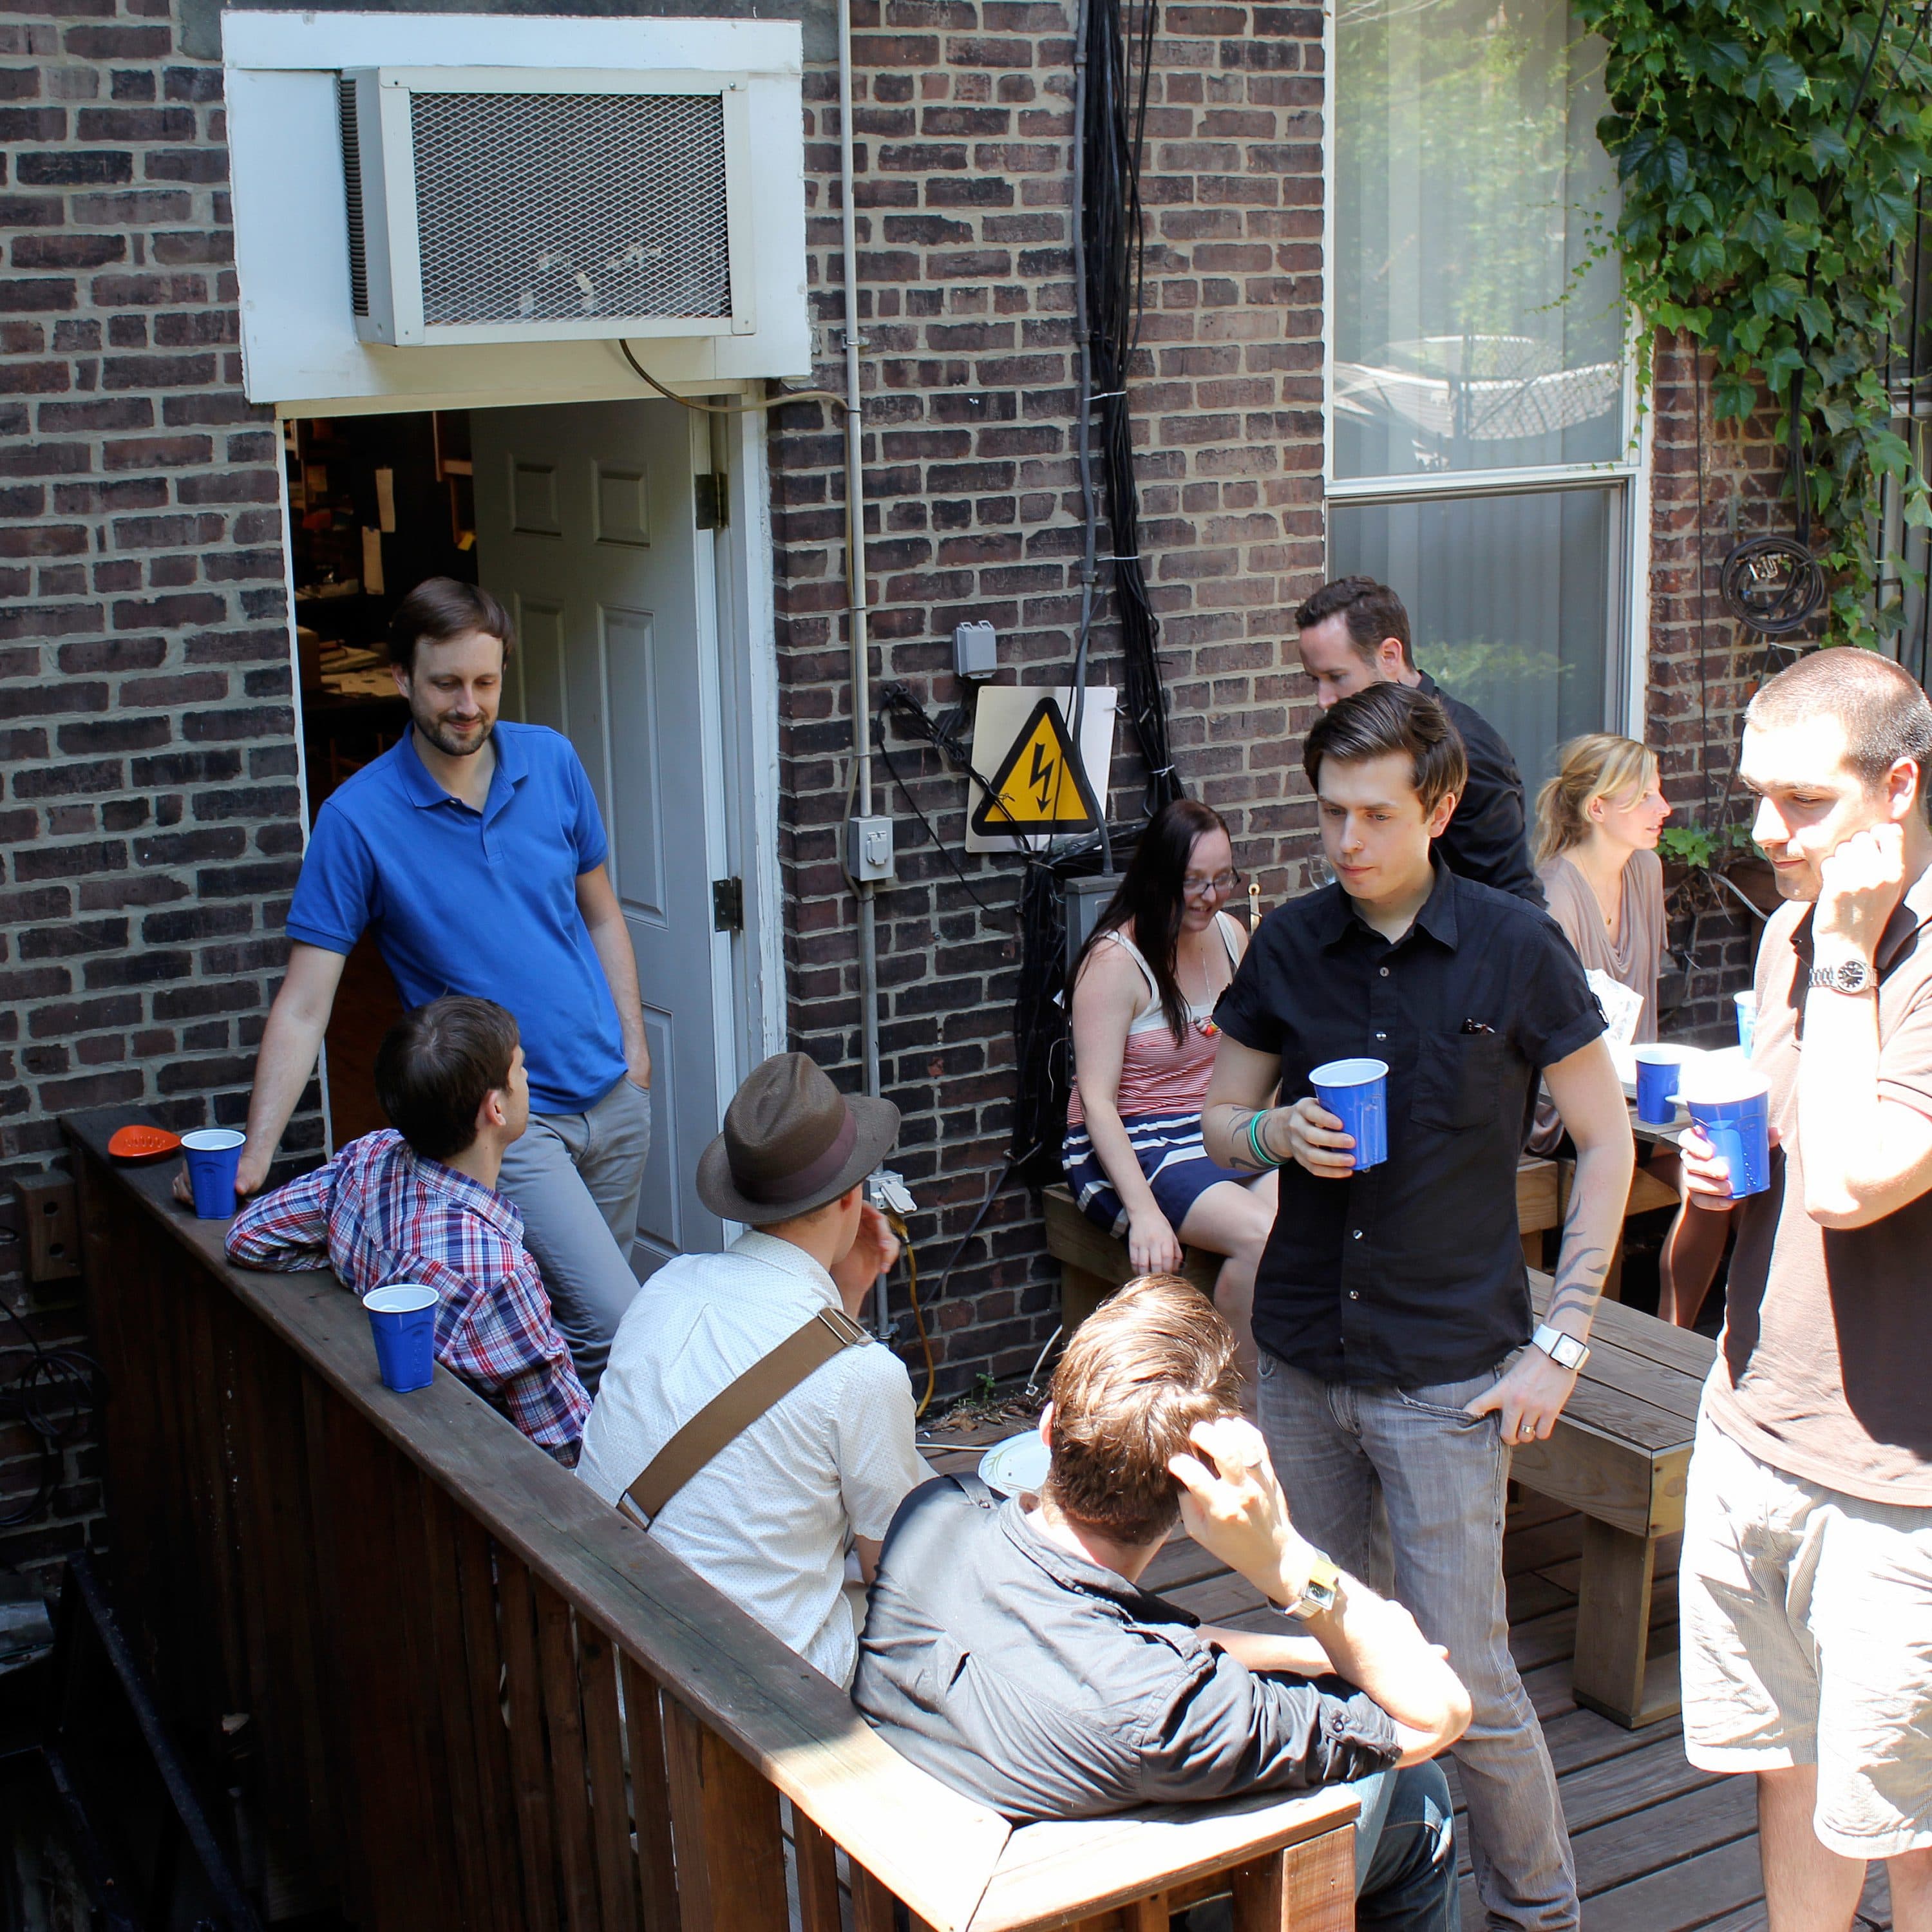 A group of people is gathered on a wooden deck outside a brick building. Some are seated, and others are standing, holding blue cups. The scene appears casual and social. One person is entering or exiting through a door in the background. Sunlight illuminates the area.